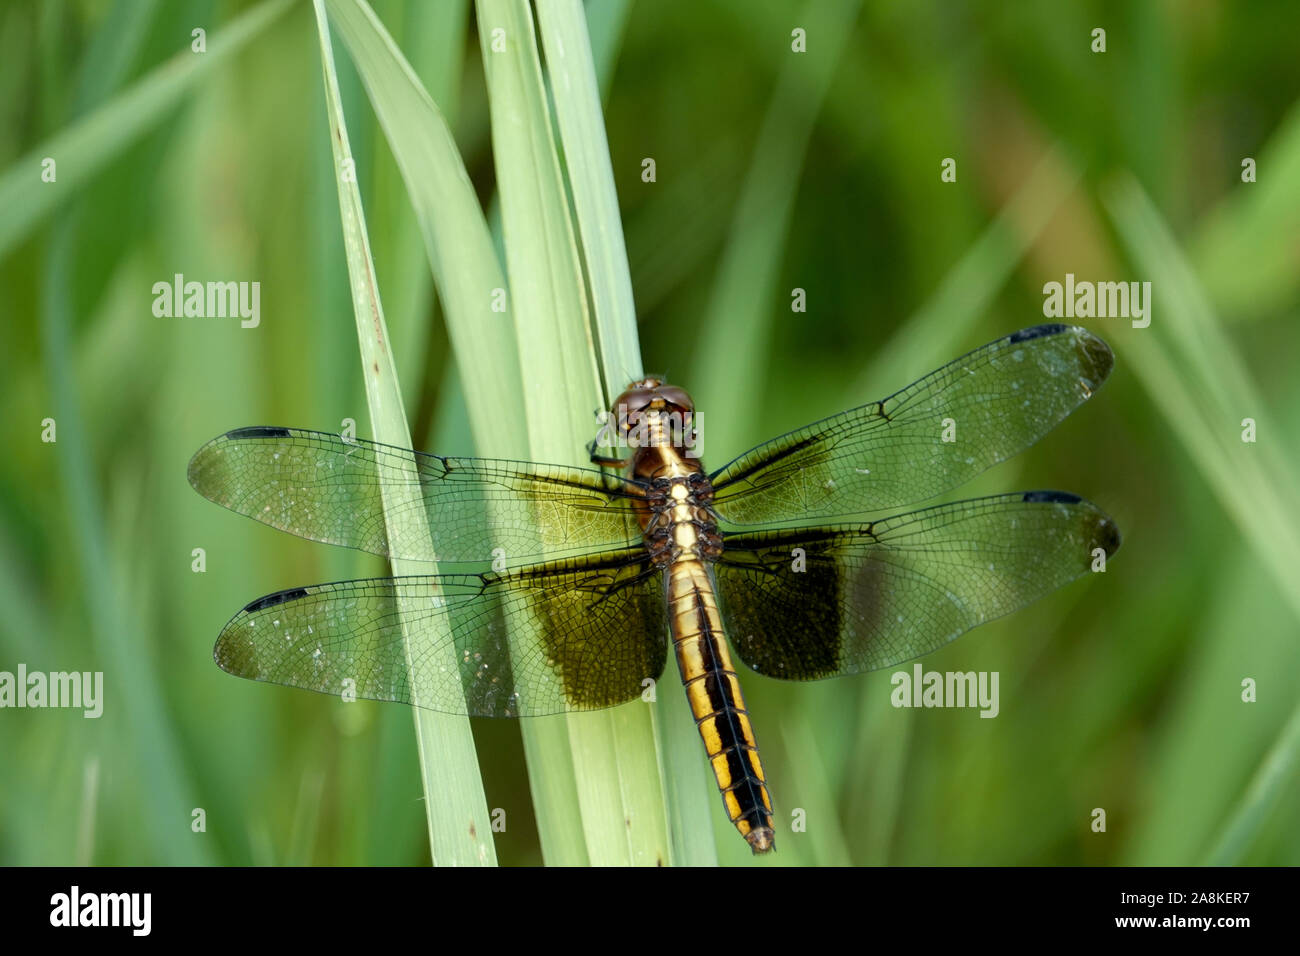 Widow Skimmer Dragonfly Perched on Leaf Stock Photo